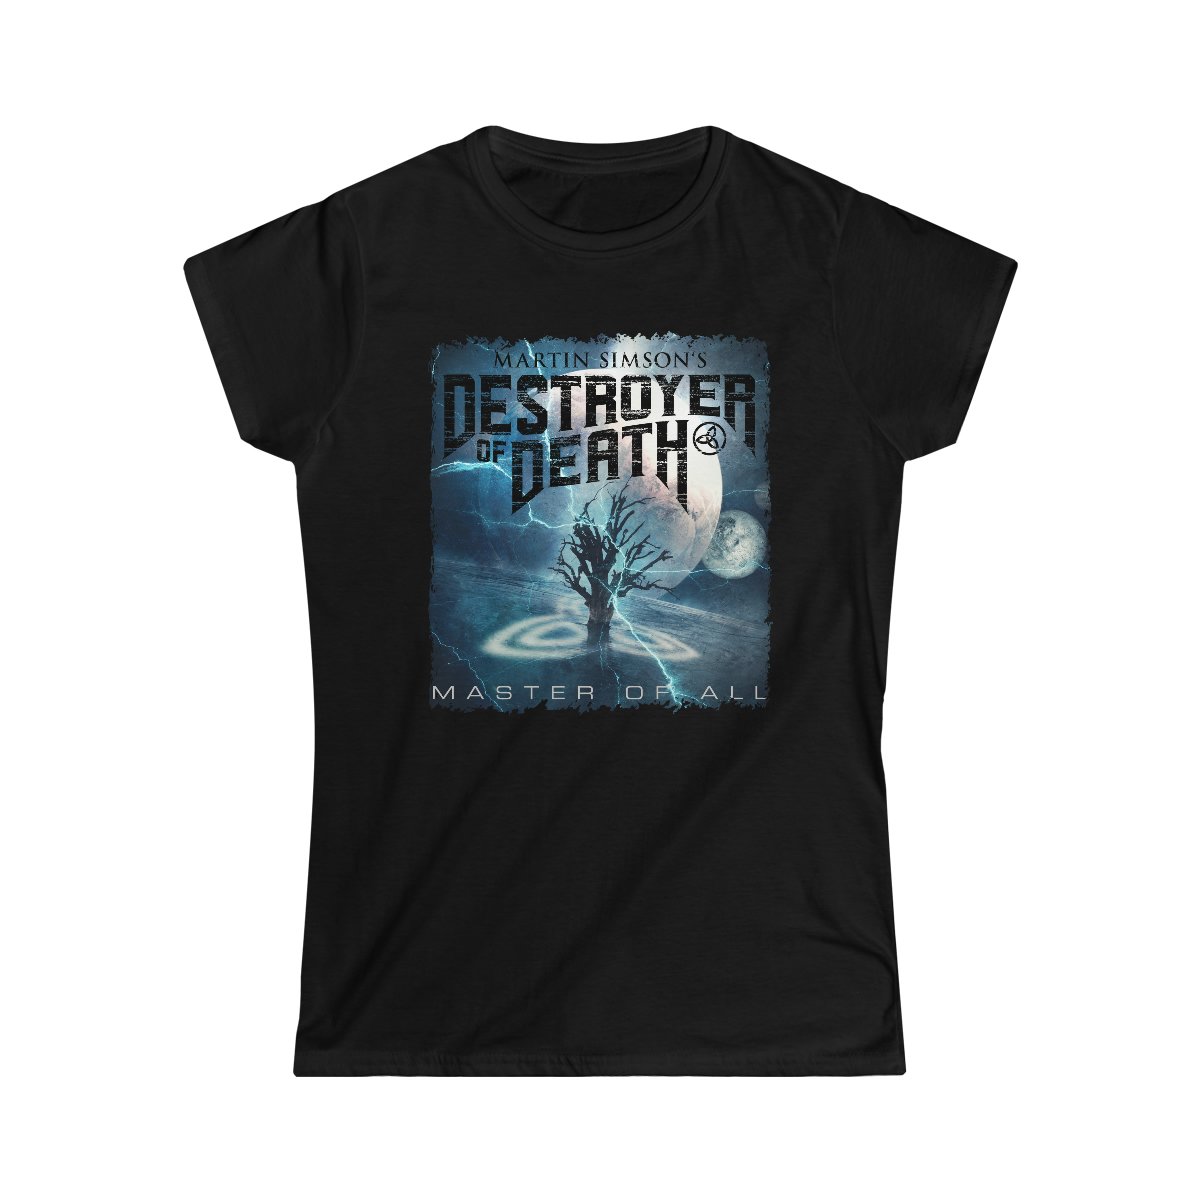 Martin Simson’s Destroyer of Death – Master of All Women’s Short Sleeve Tshirt 64000L